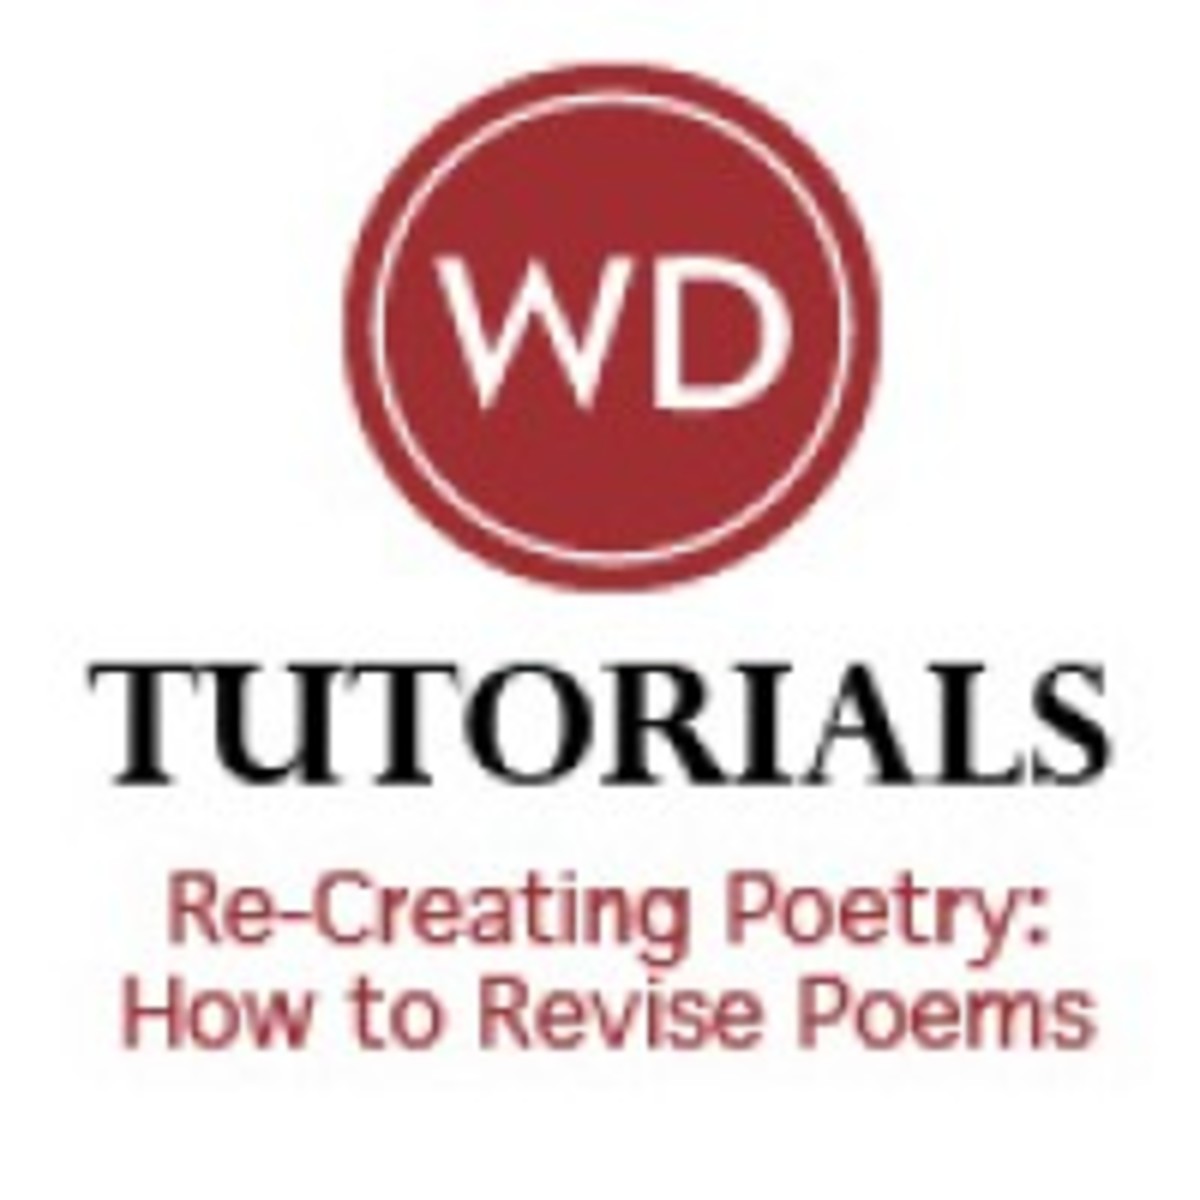 Recreating_Poetry_Revise_Poems